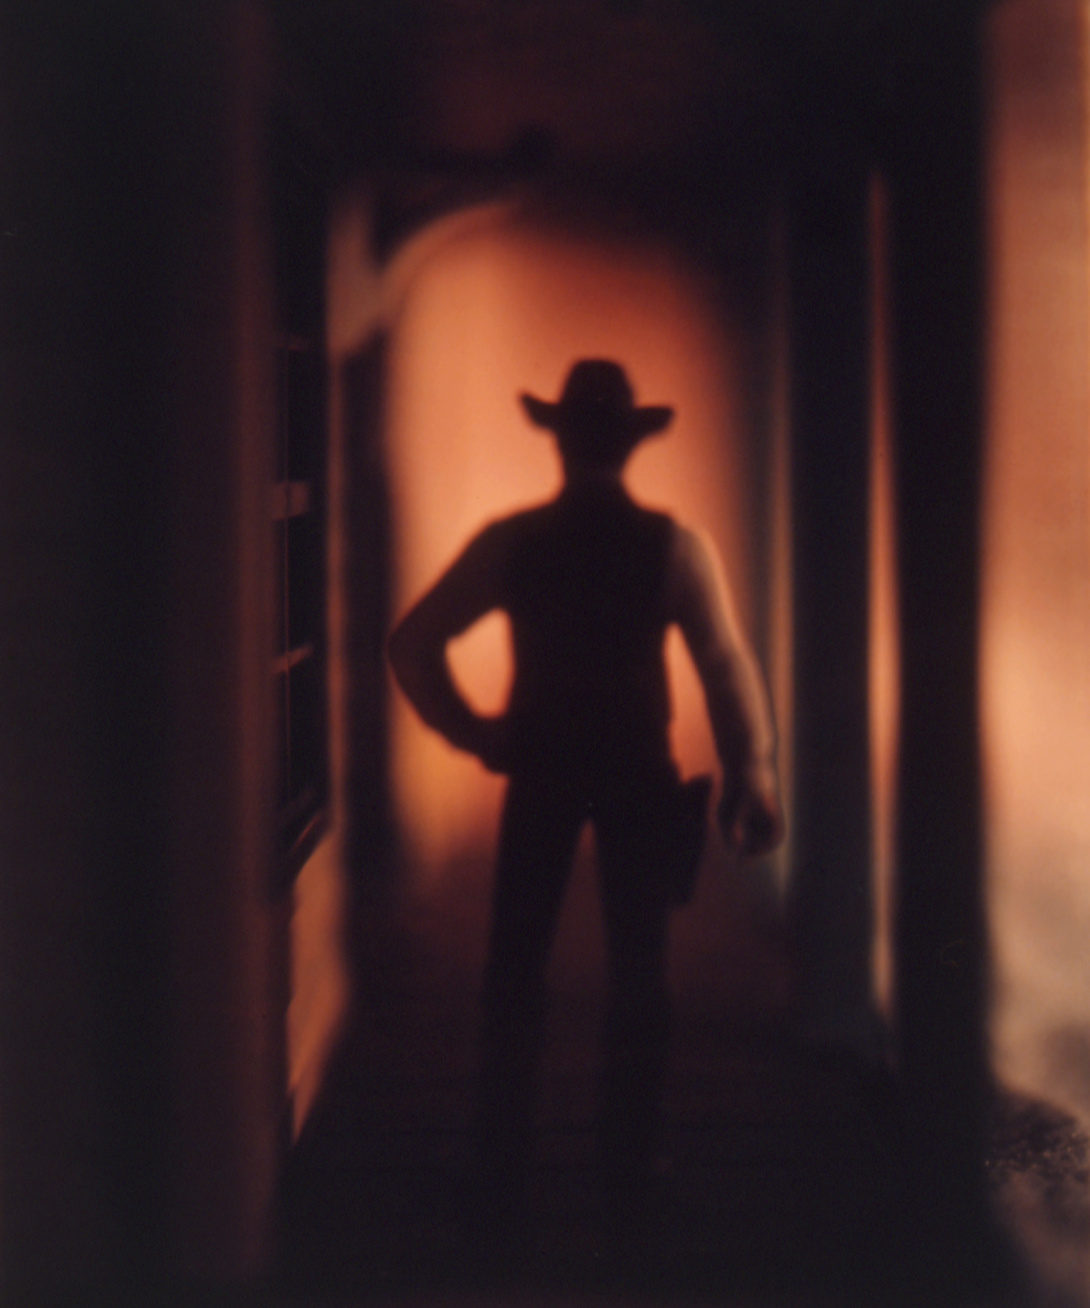 A German-designed cowboy figure—saved from a set given to the artist by his parents—stands in a hallway to scale. Its hand on one hip, a holster on the other. The scene is blurred, and a warm orange glow casts the figure and pillars in shadows.